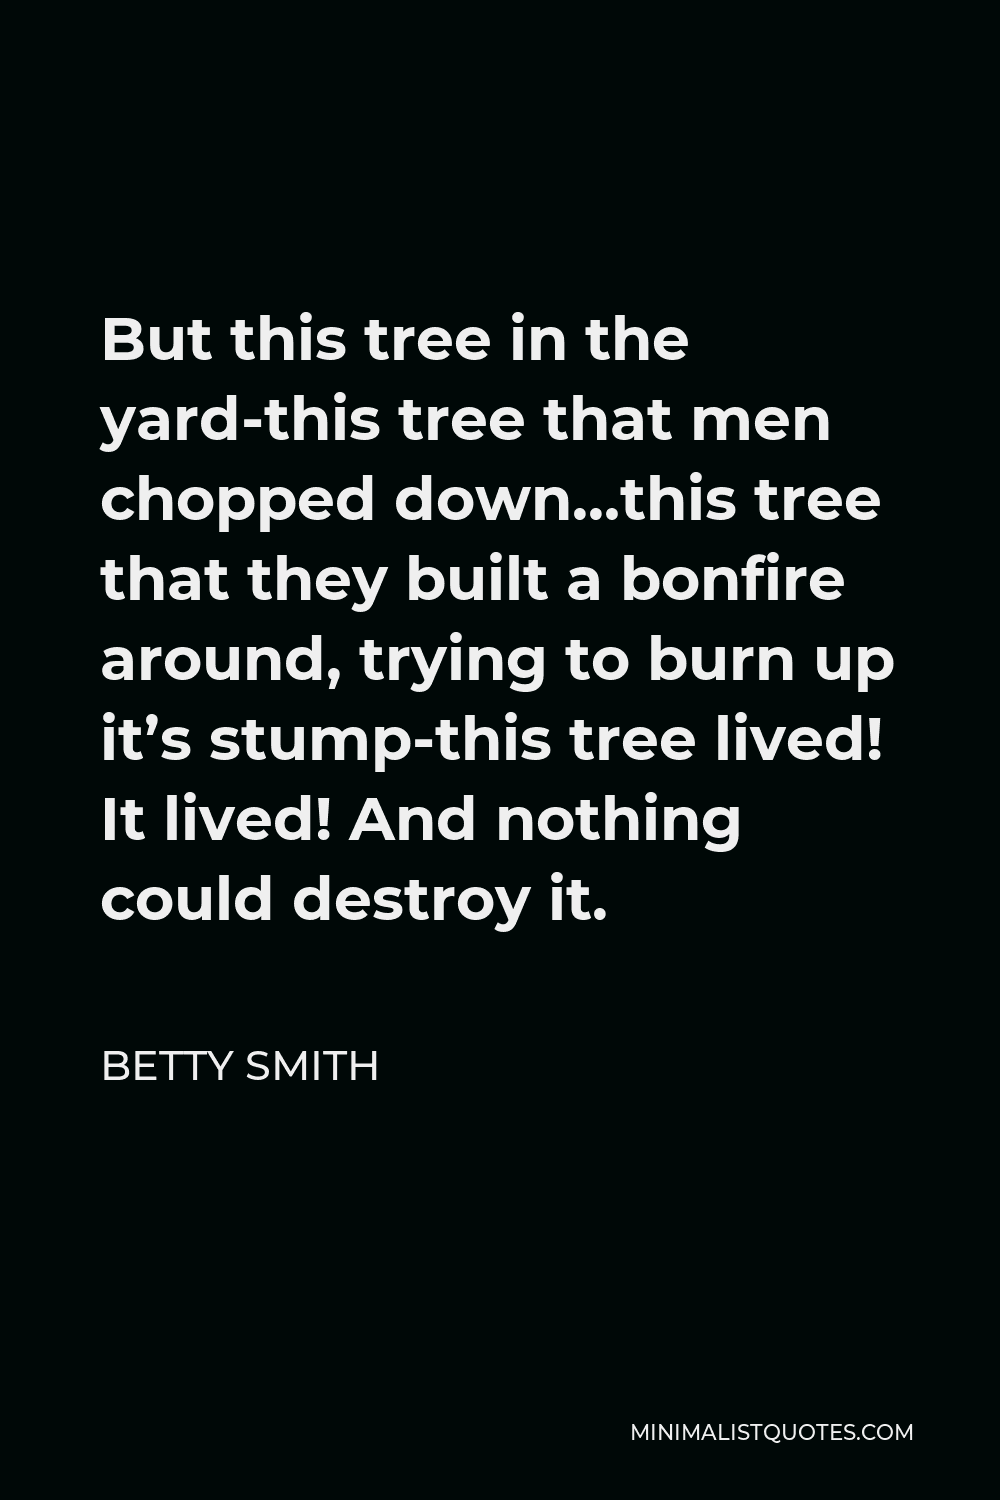 Betty Smith Quote - But this tree in the yard-this tree that men chopped down…this tree that they built a bonfire around, trying to burn up it’s stump-this tree lived! It lived! And nothing could destroy it.